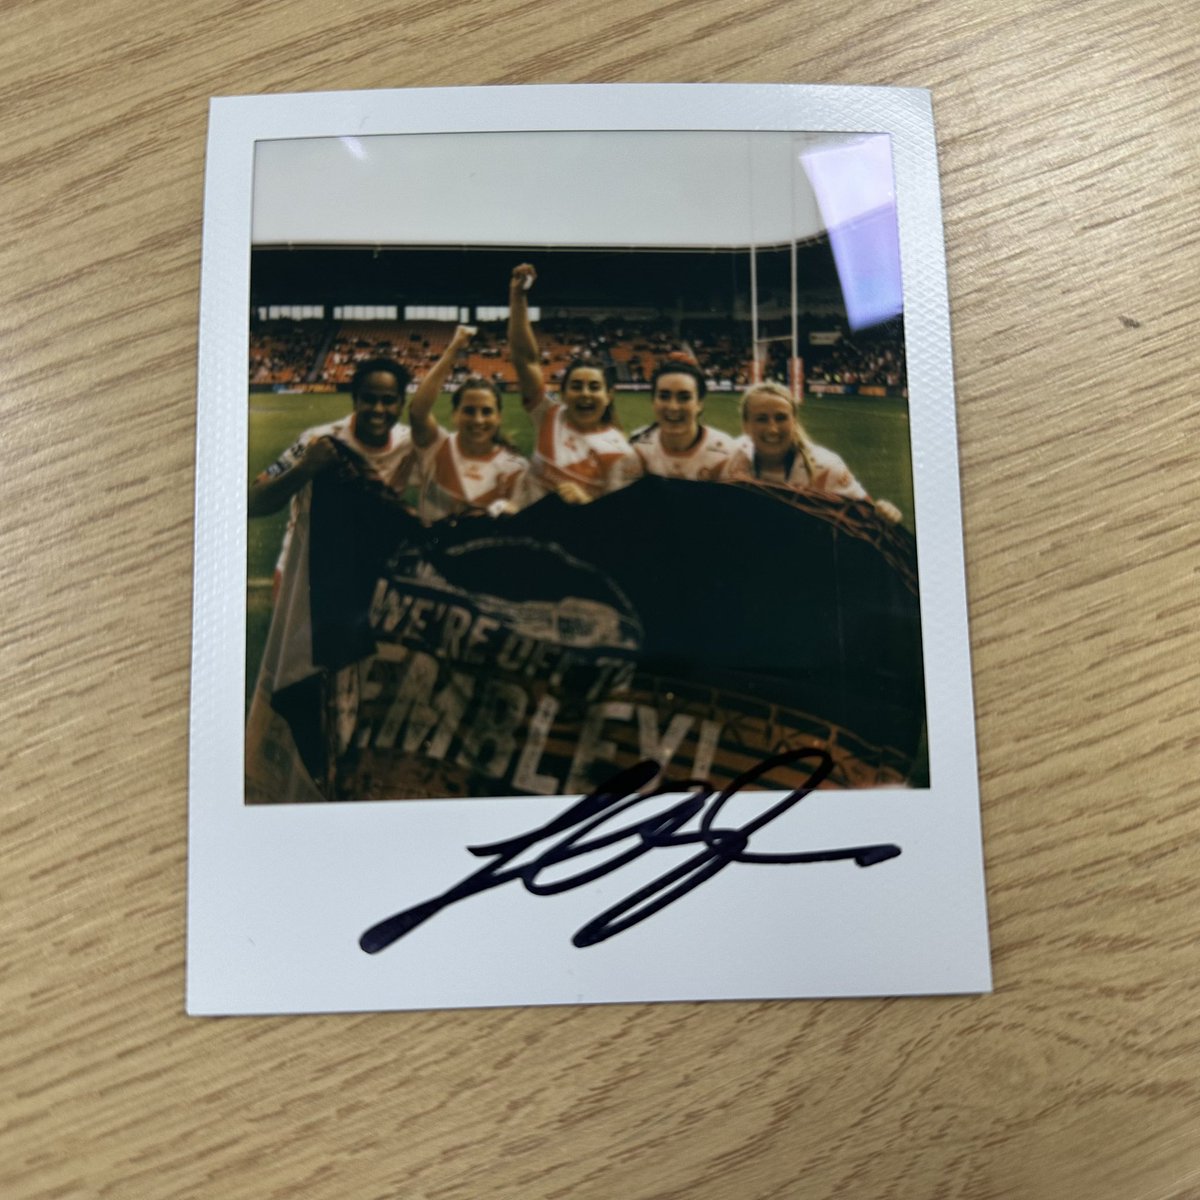 📸 Another trip to Wembley sealed! Win this signed @Jodie_cunny Polaroid from yesterday, as Saints celebrated a big victory over York! To enter: • Follow us • Like & share this post • Tag a mate Winner selected 22/5/24 #COYS